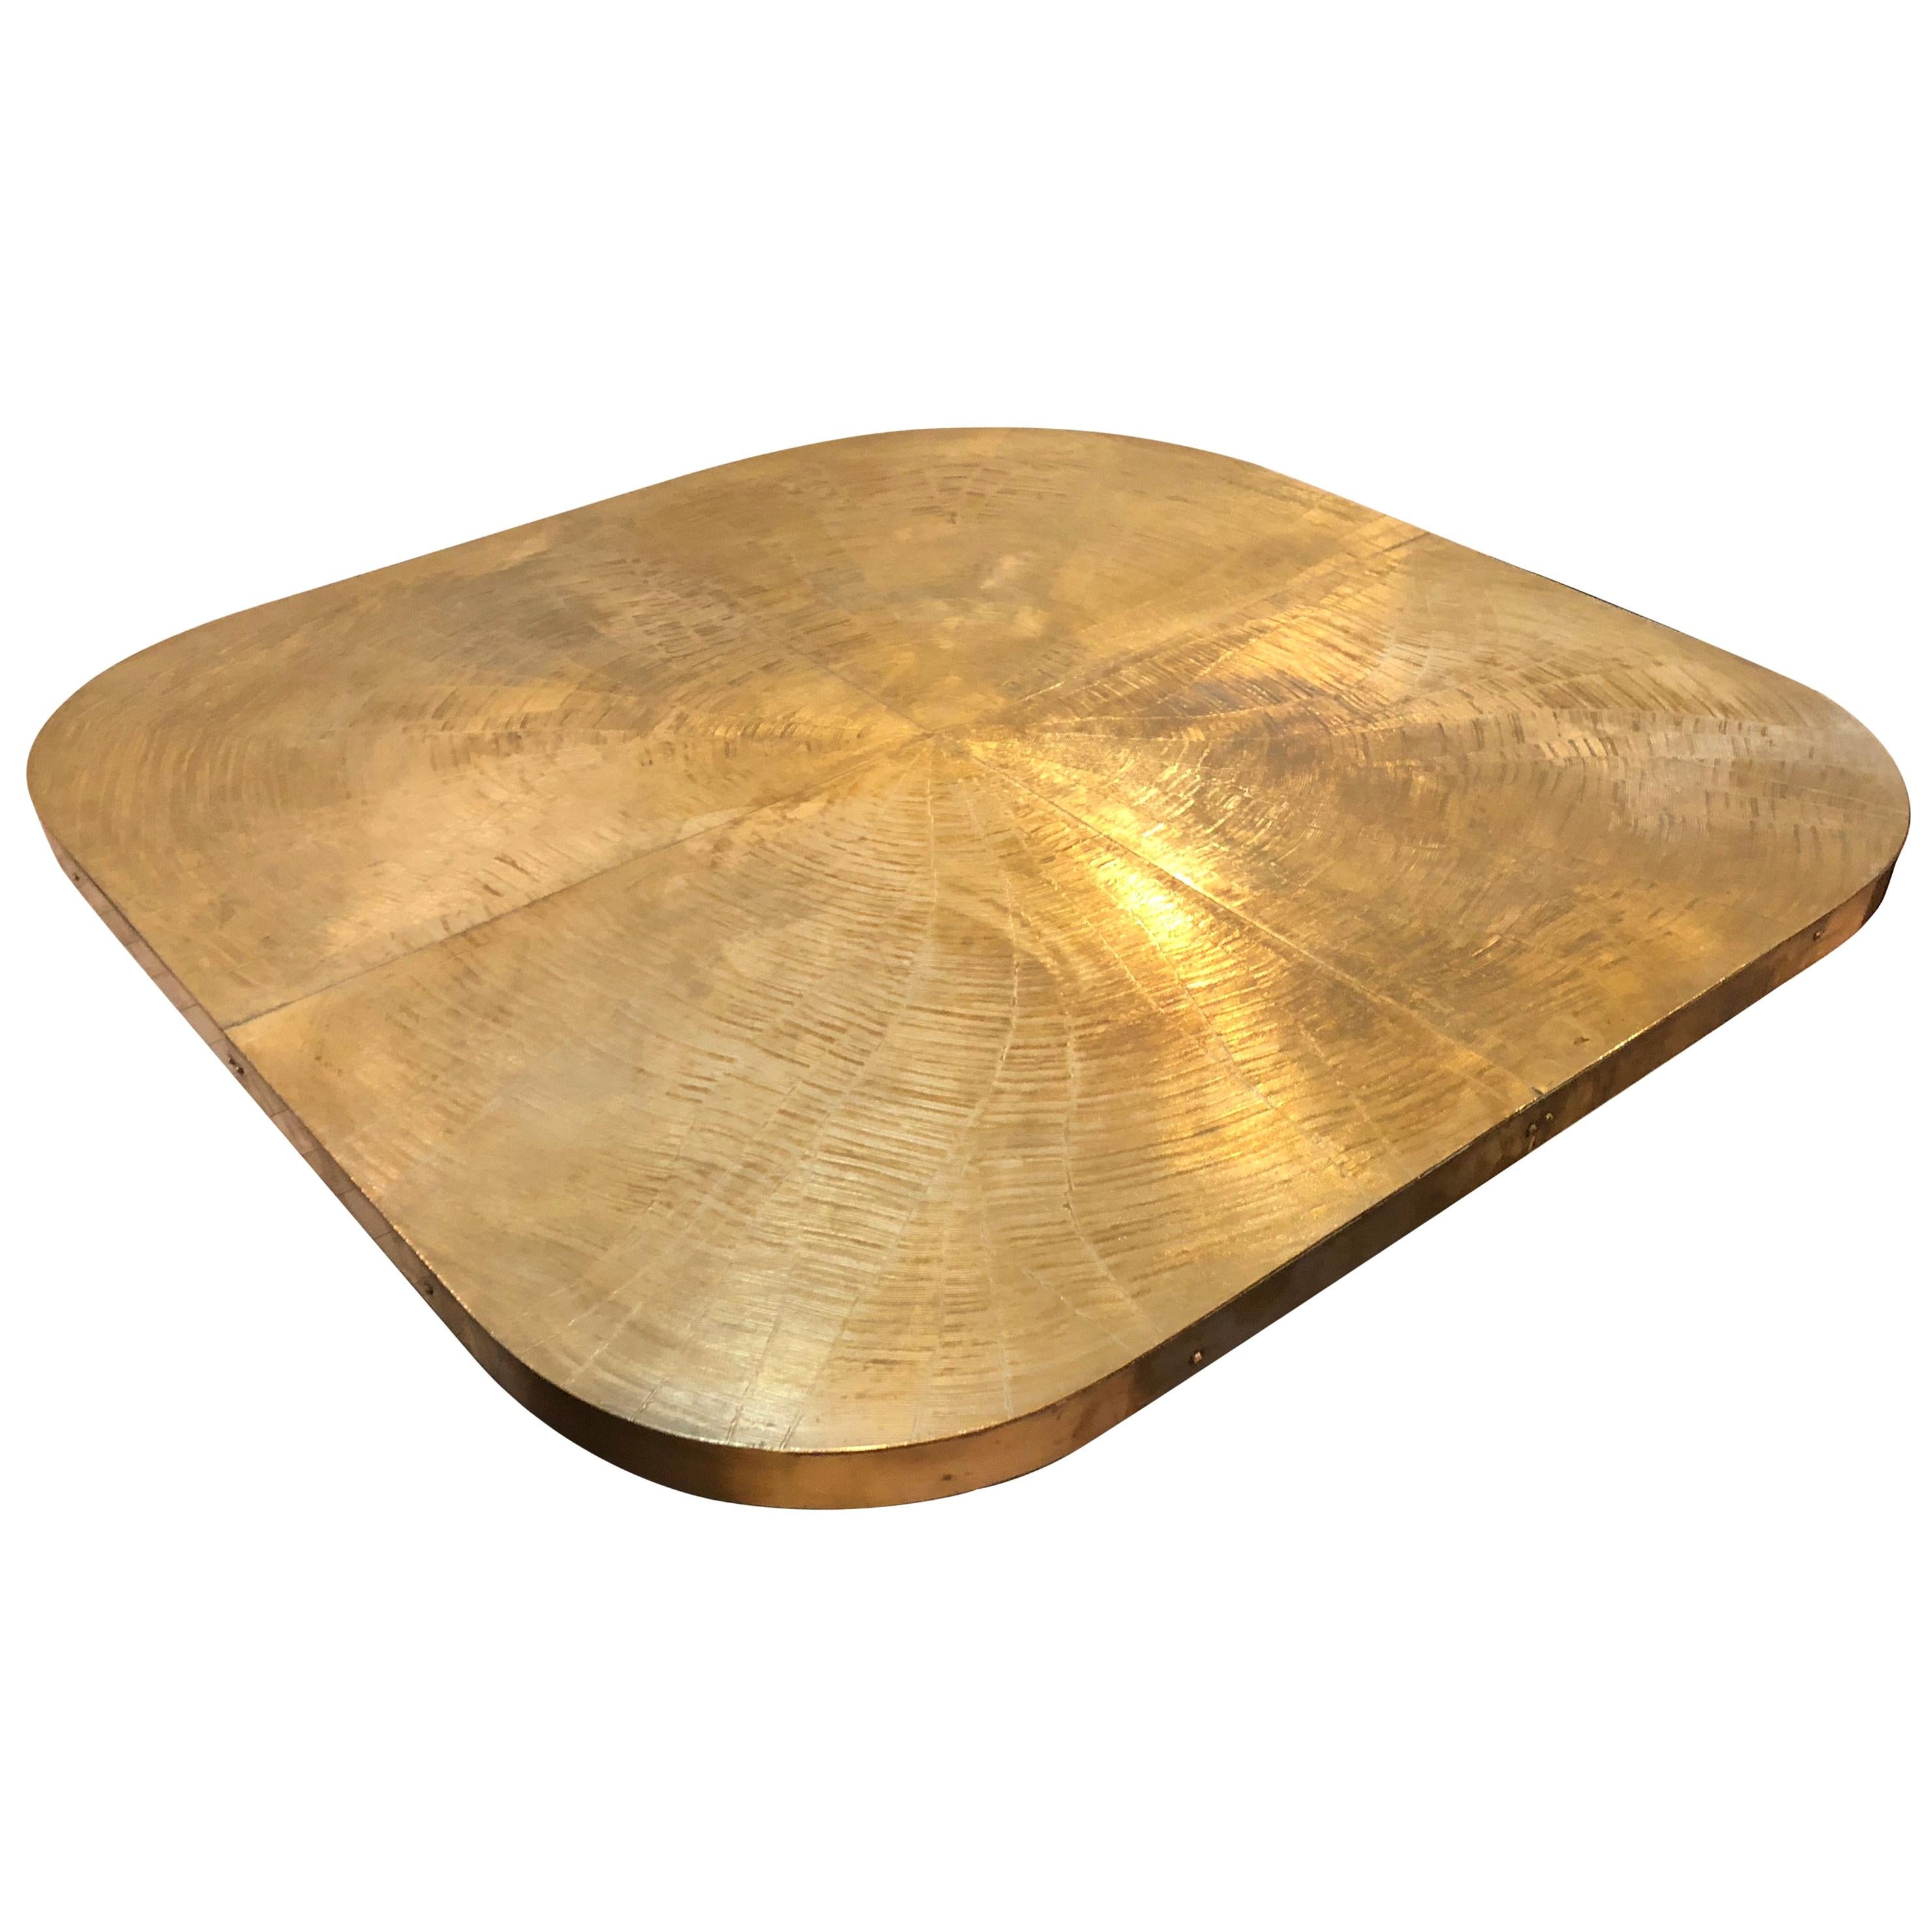 Signed Georges Matthias Bronze Etched Coffee Table with Sunburst For Sale